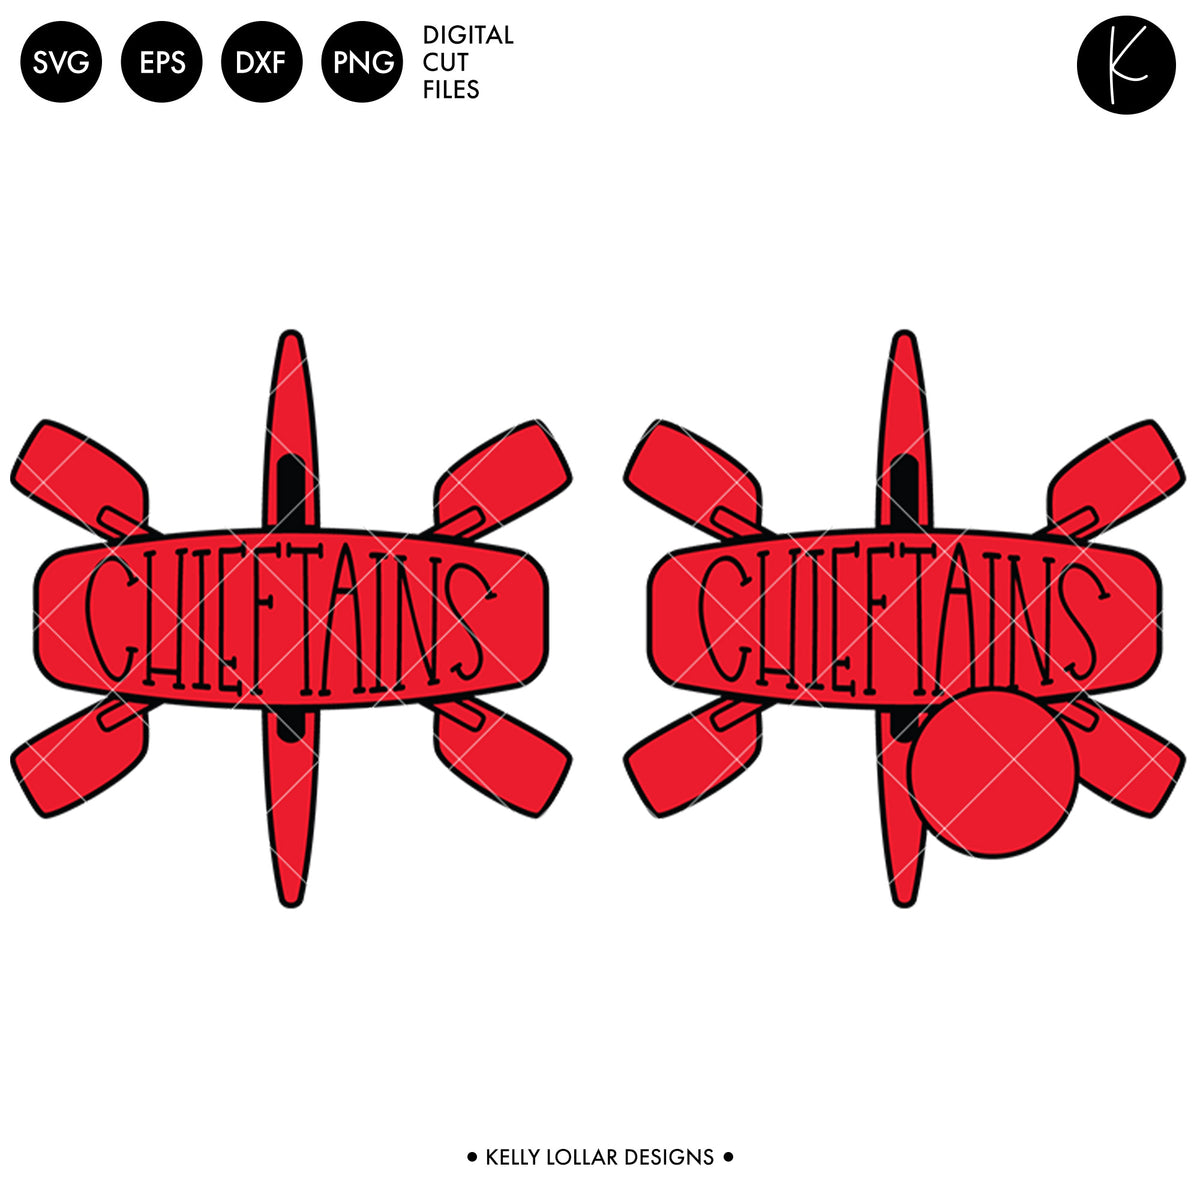 Chieftains Rowing Crew Bundle | SVG DXF EPS PNG Cut Files